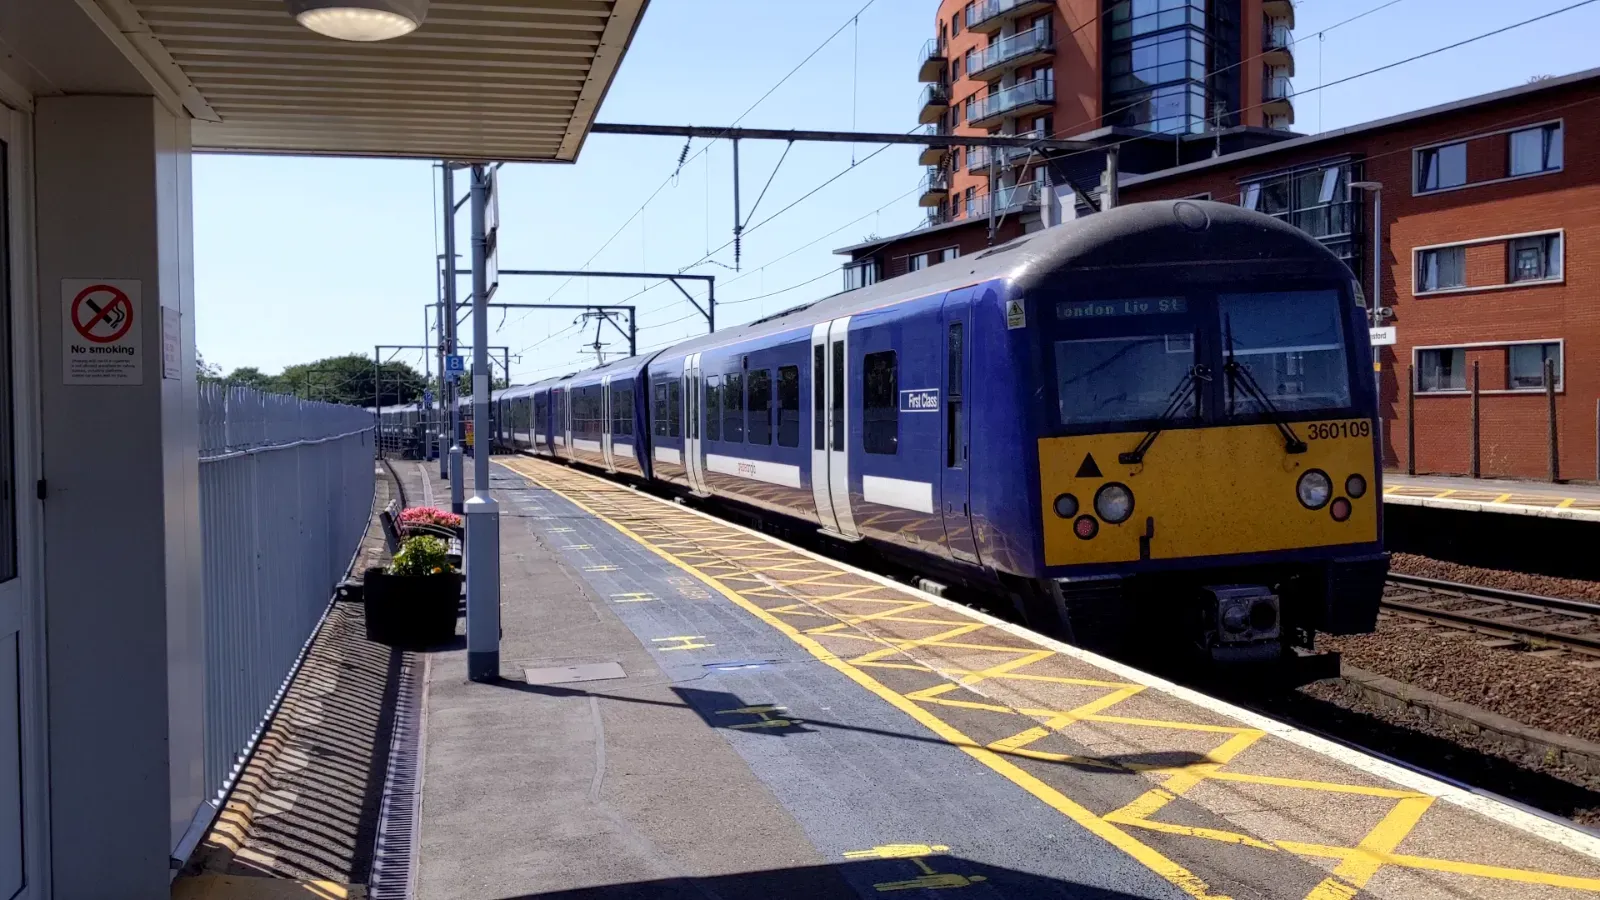 A class 360 train departs Witham with its blue livery and white doors. The rear of the train is painted yellow. It is a summer day with a clear, blue sky.